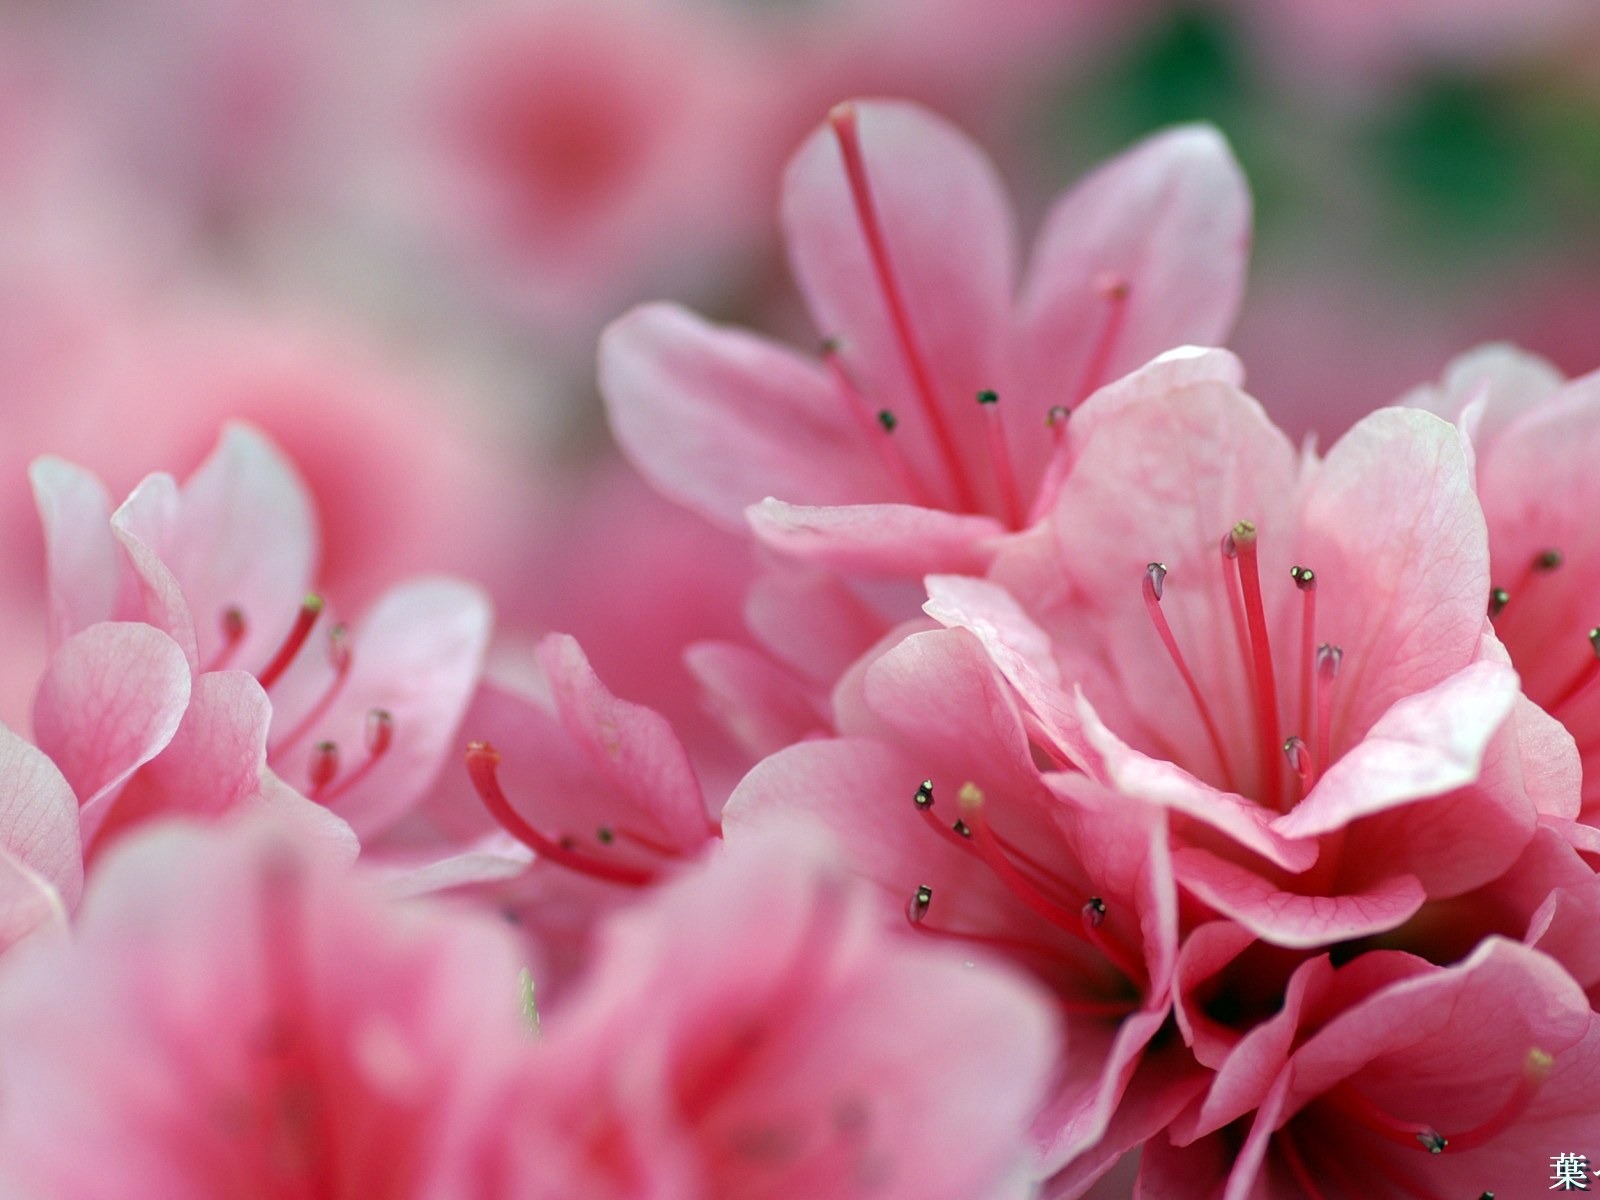 Personal Flowers HD Wallpapers #45 - 1600x1200